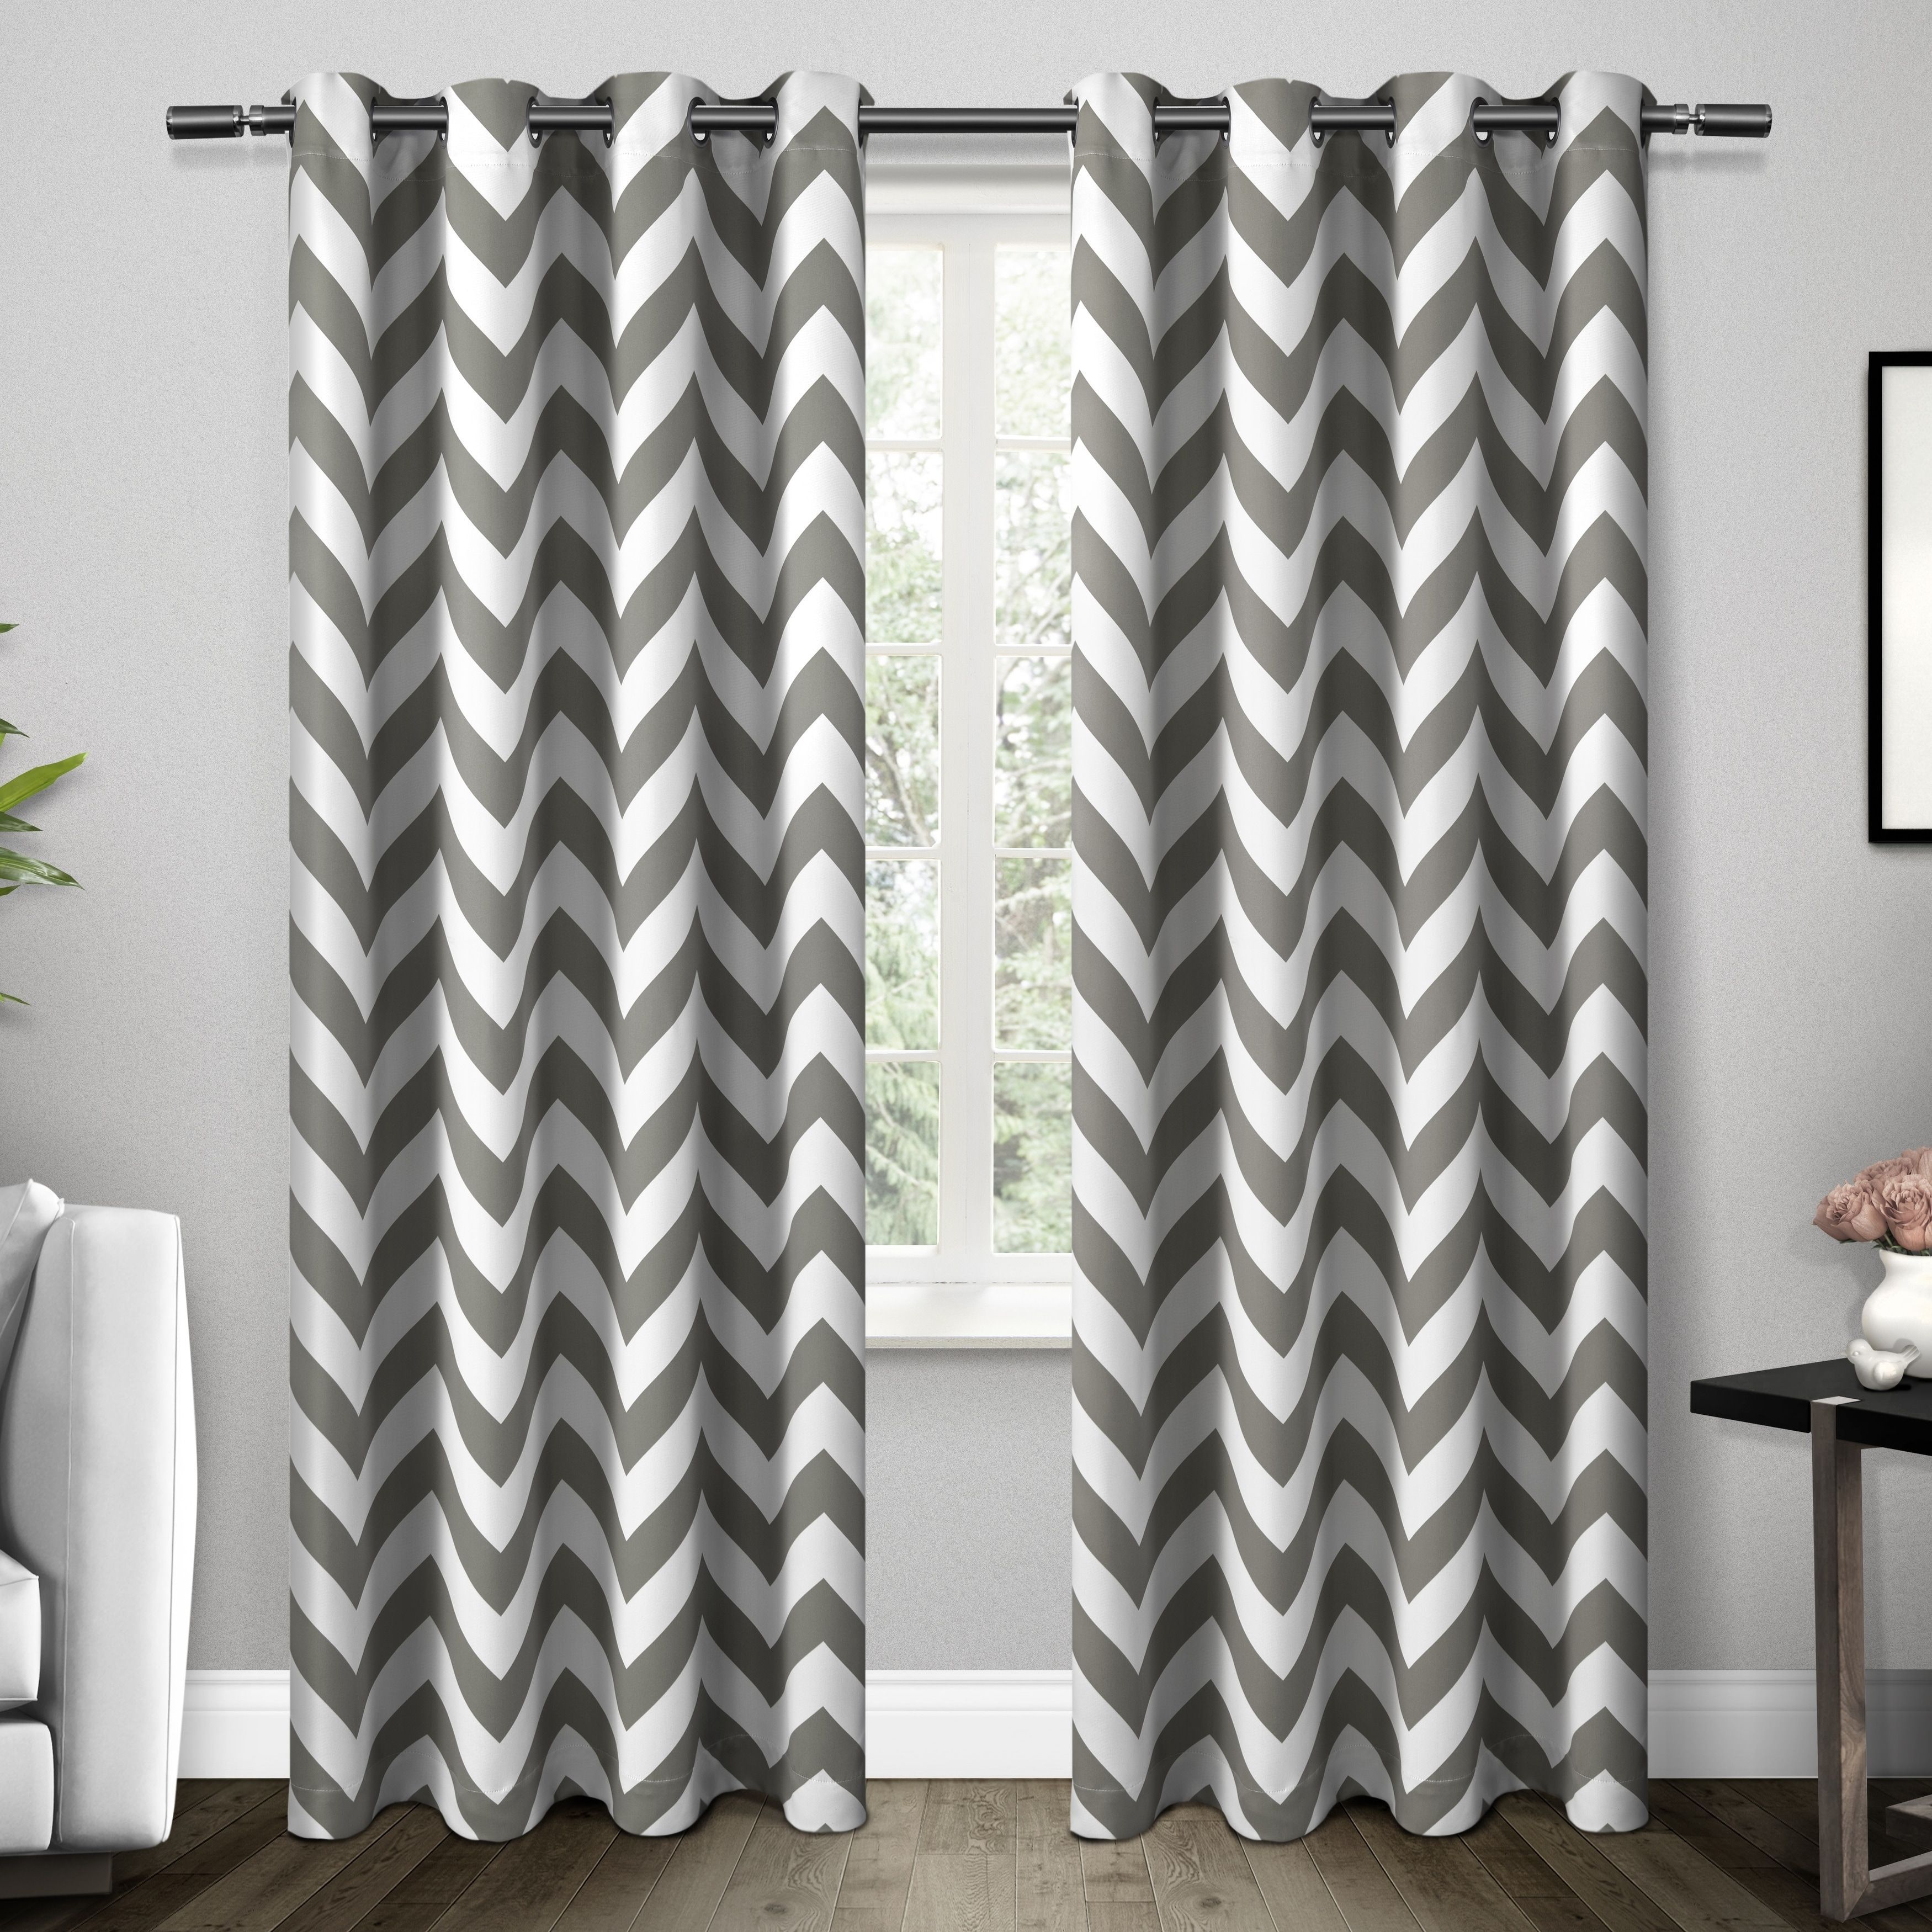 Ati Home Mars Thermal Woven Blackout Grommet Top Curtain Intended For The Curated Nomad Duane Blackout Curtain Panel Pairs (View 28 of 30)